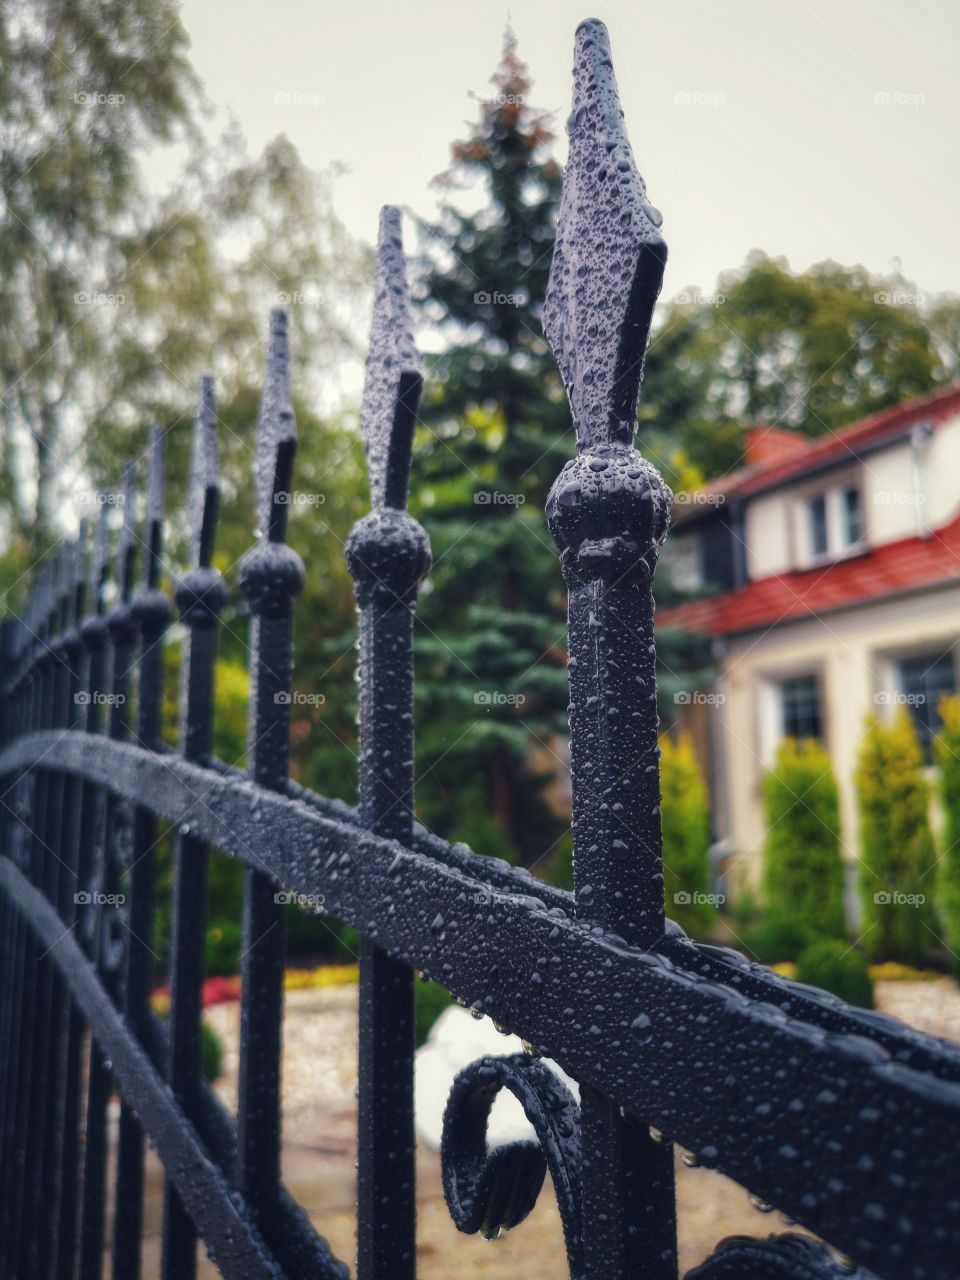 Wrought-iron fence in raindrops